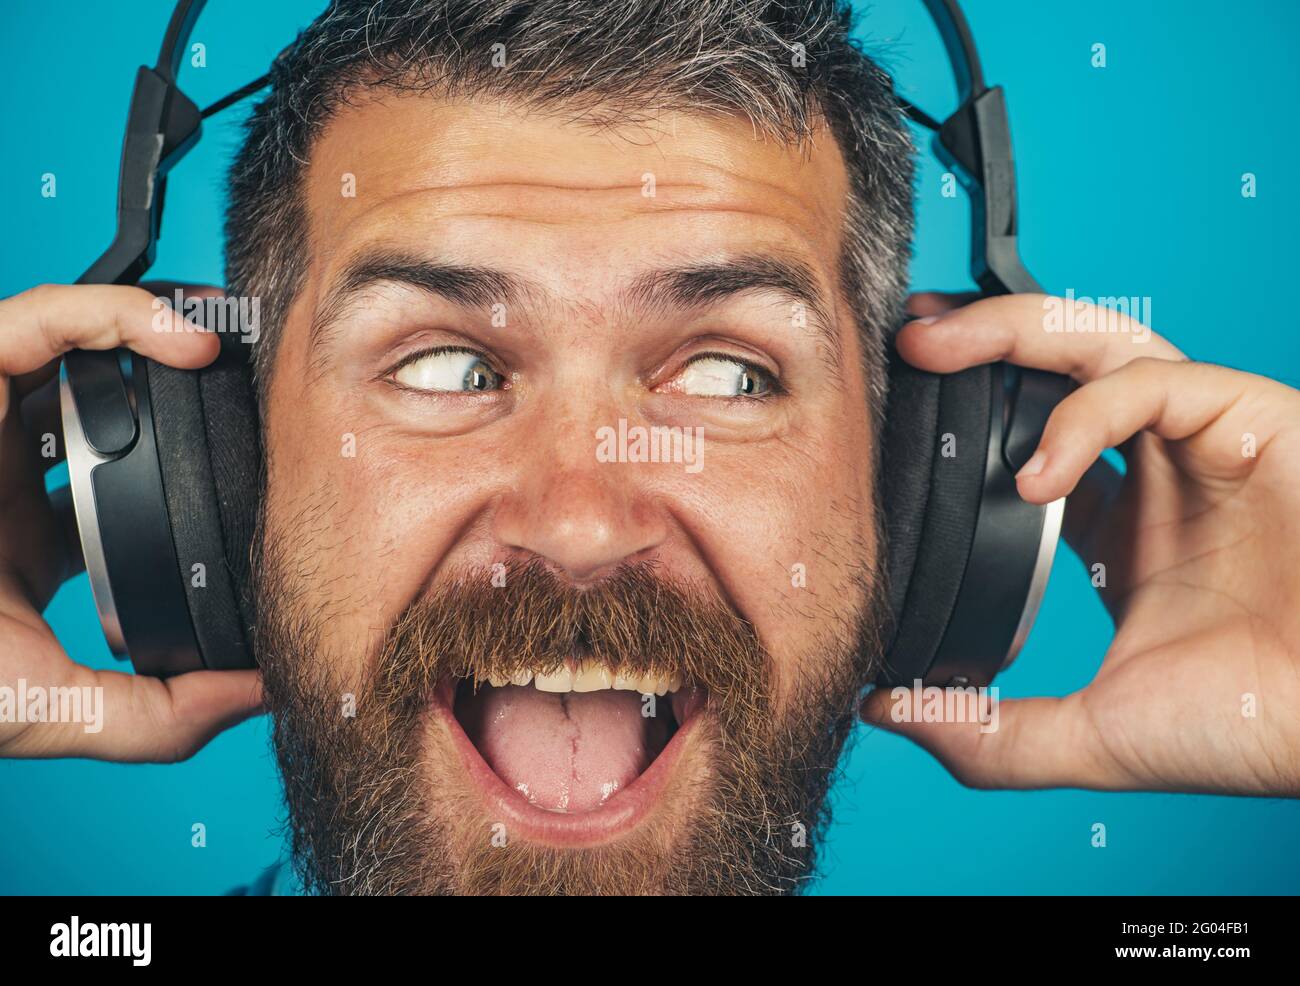 Handsome smiling bearded man with headphones. Emotional male with headphone listening music. Stock Photo